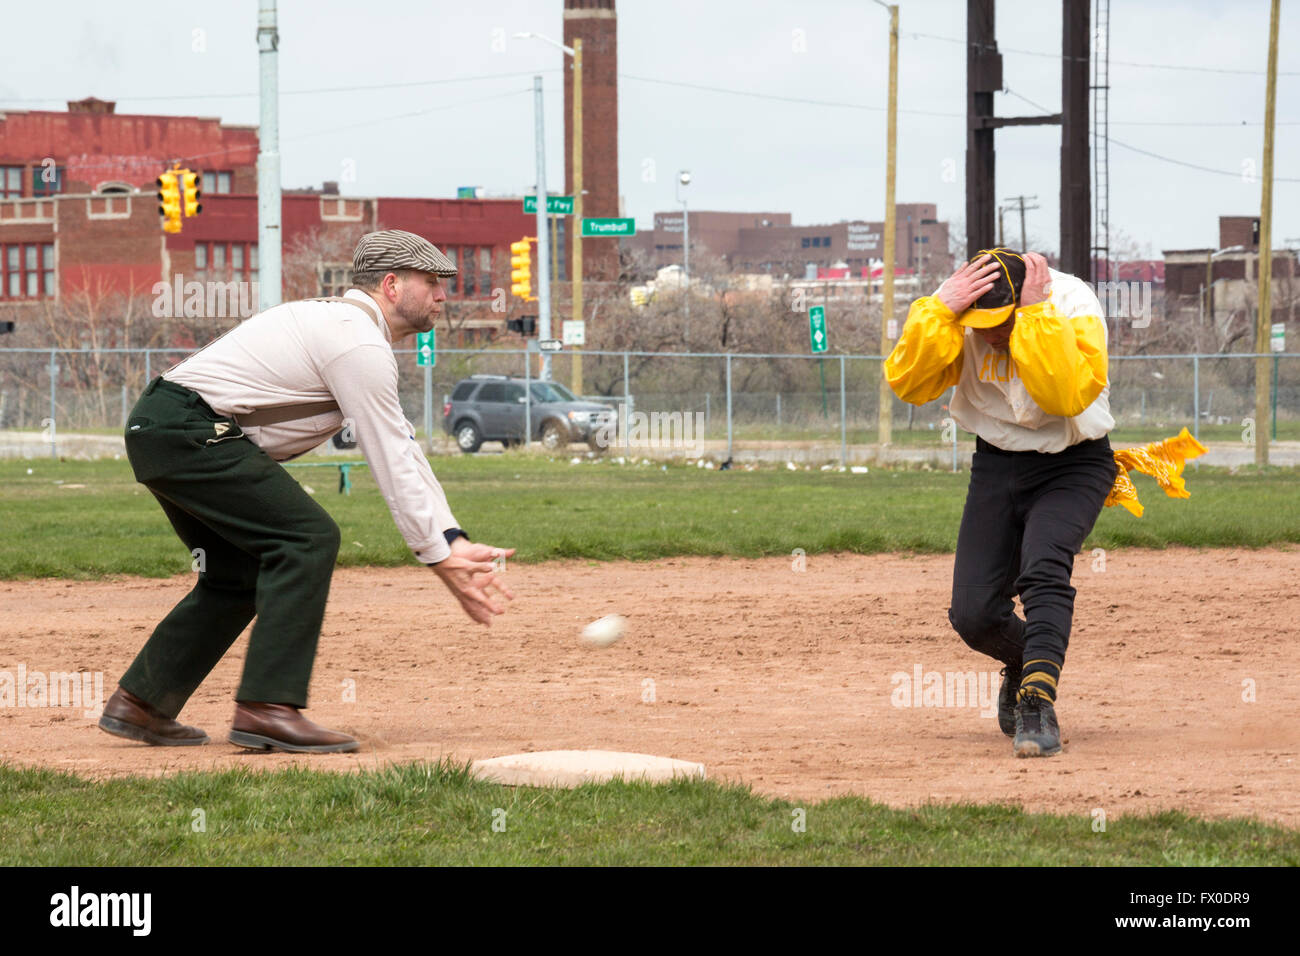 Detroit, Michigan USA - 9 April 2016 - A vintage base ball game, with rules and uniforms from the 1860s, is played to say farewell to Navin Field. As Navin Field and later Tiger Stadium, the field was home to the Detroit Tigers from 1912-1999. Since then, the field has been maintained by volunteers; it will now be redeveloped as a retail and residential complex with a playing field for youth sports. Credit:  Jim West/Alamy Live News Stock Photo